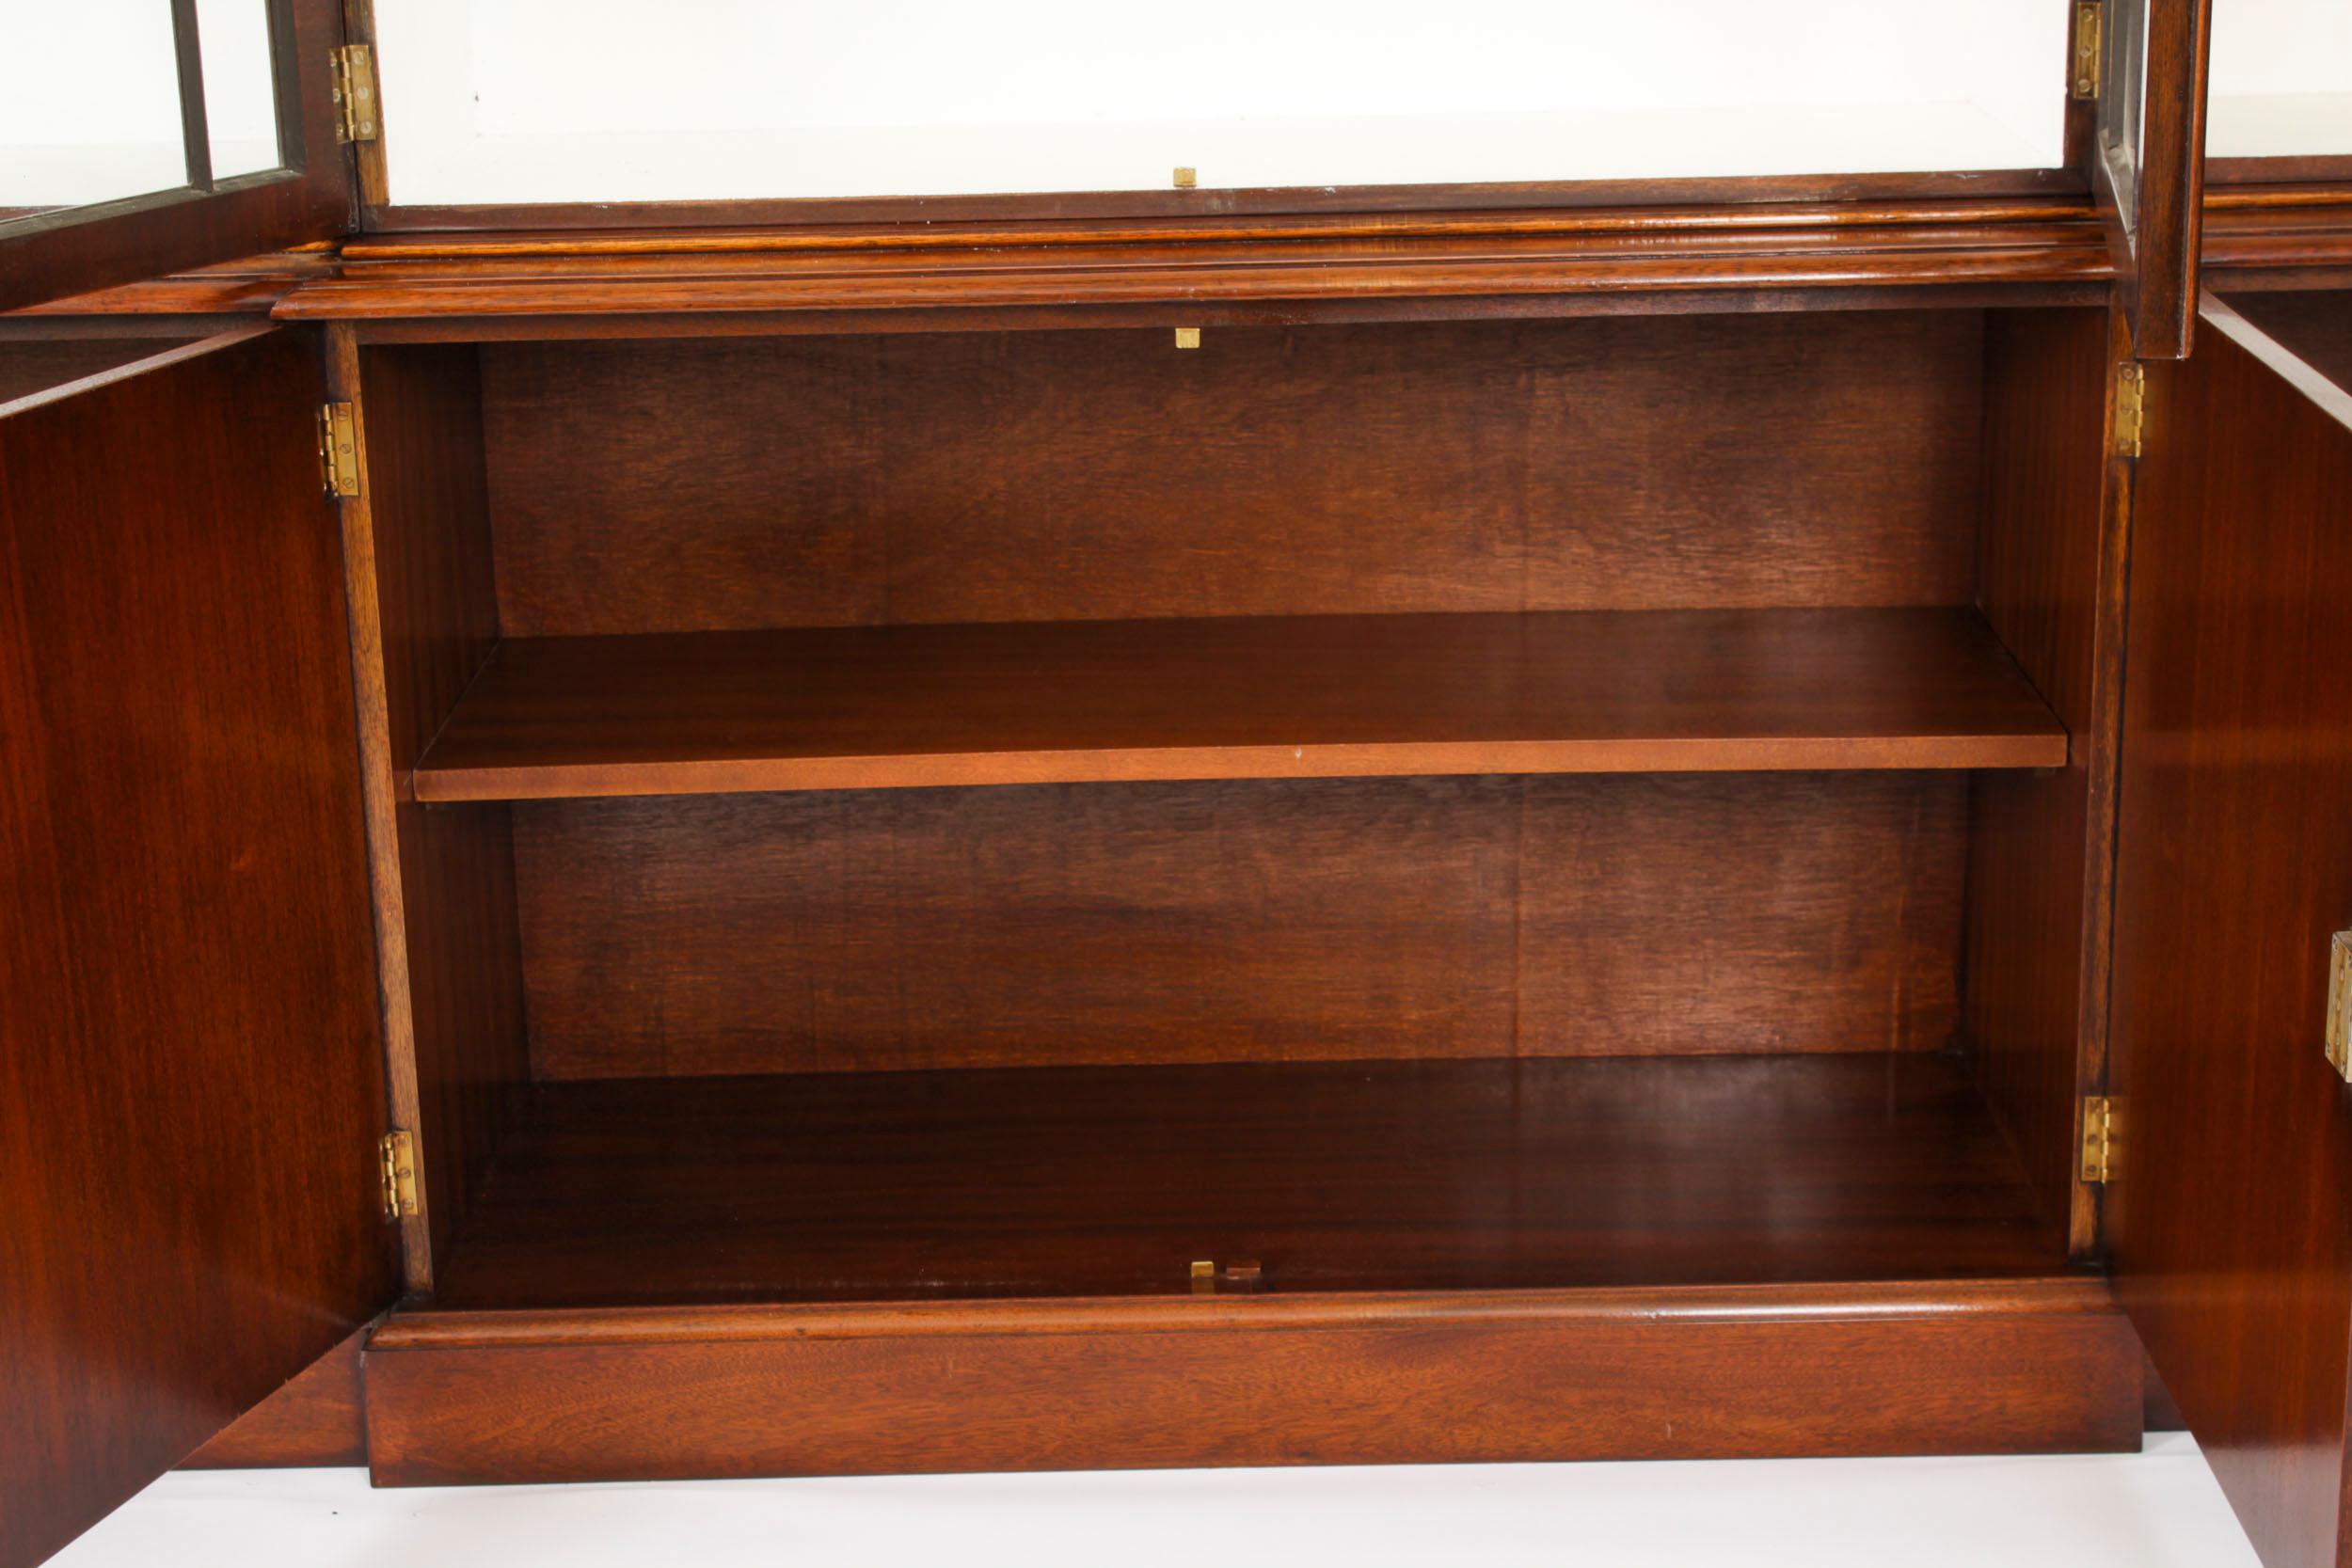 Vintage Georgian Revival Flame Mahogany Breakfront Bookcase 20th Century For Sale 11